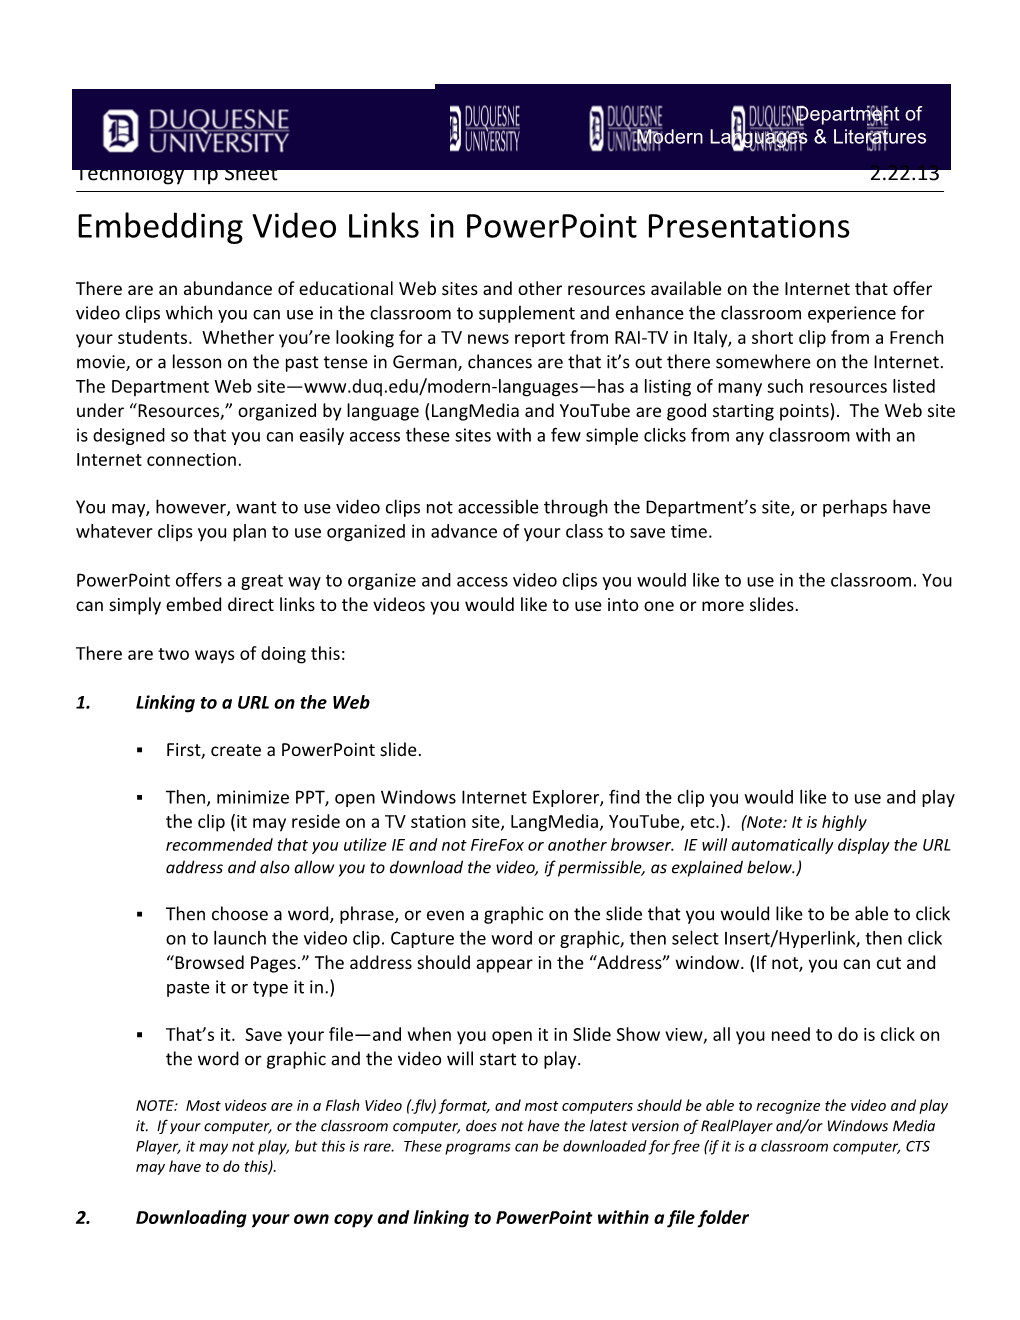 Embedding Video Links in Powerpoint Presentations